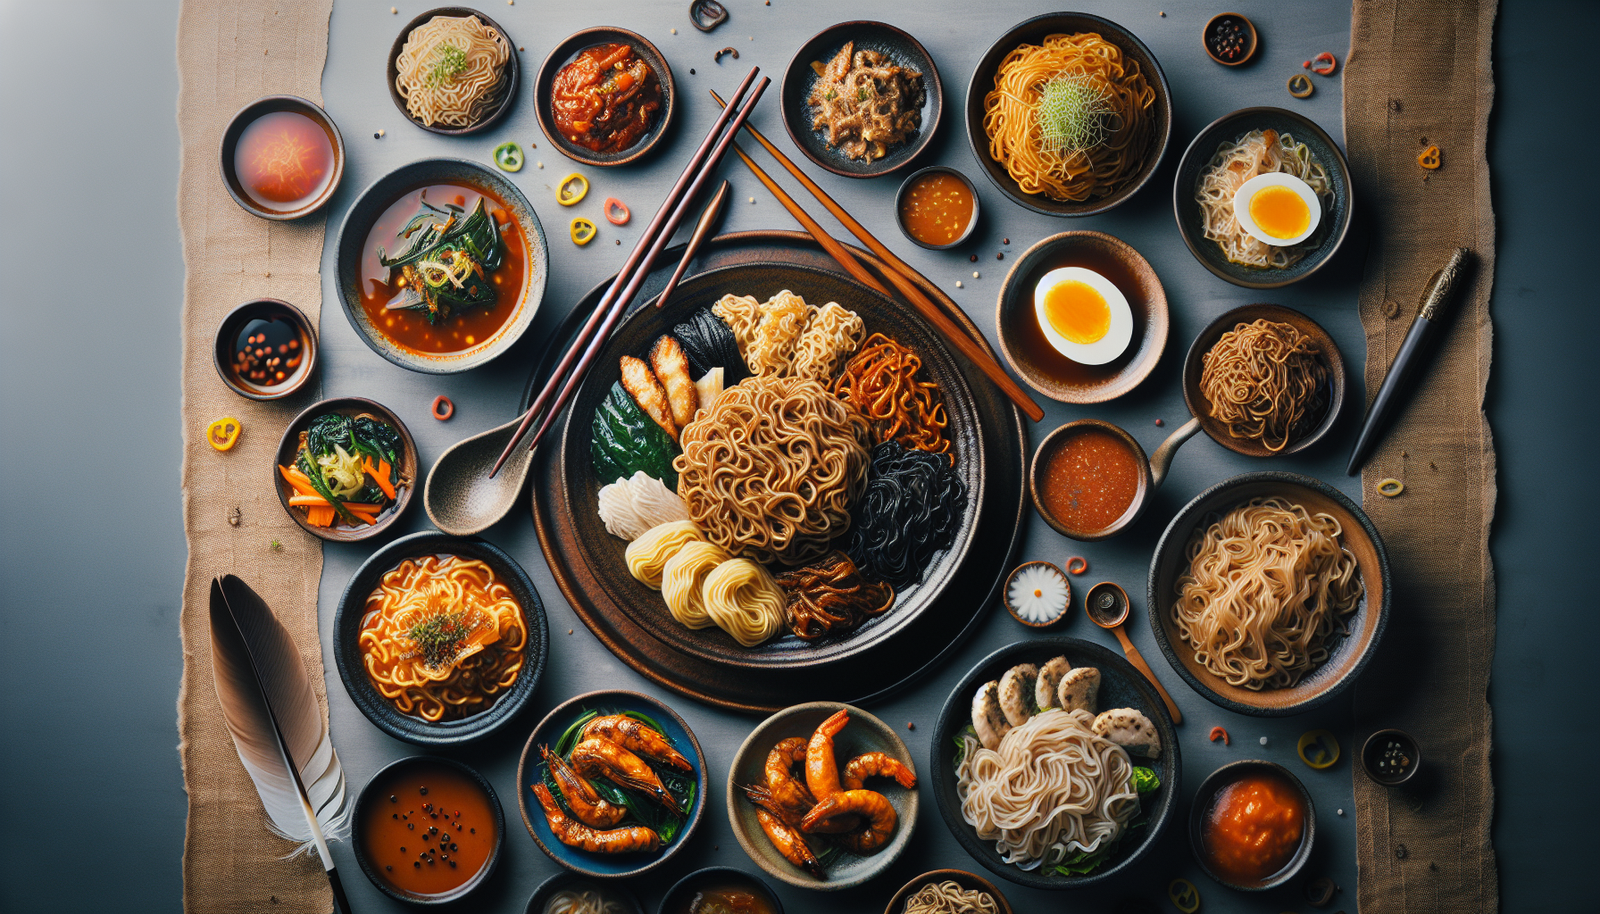 Can You Recommend A Variety Of Korean Noodle Dishes And Their Differences?